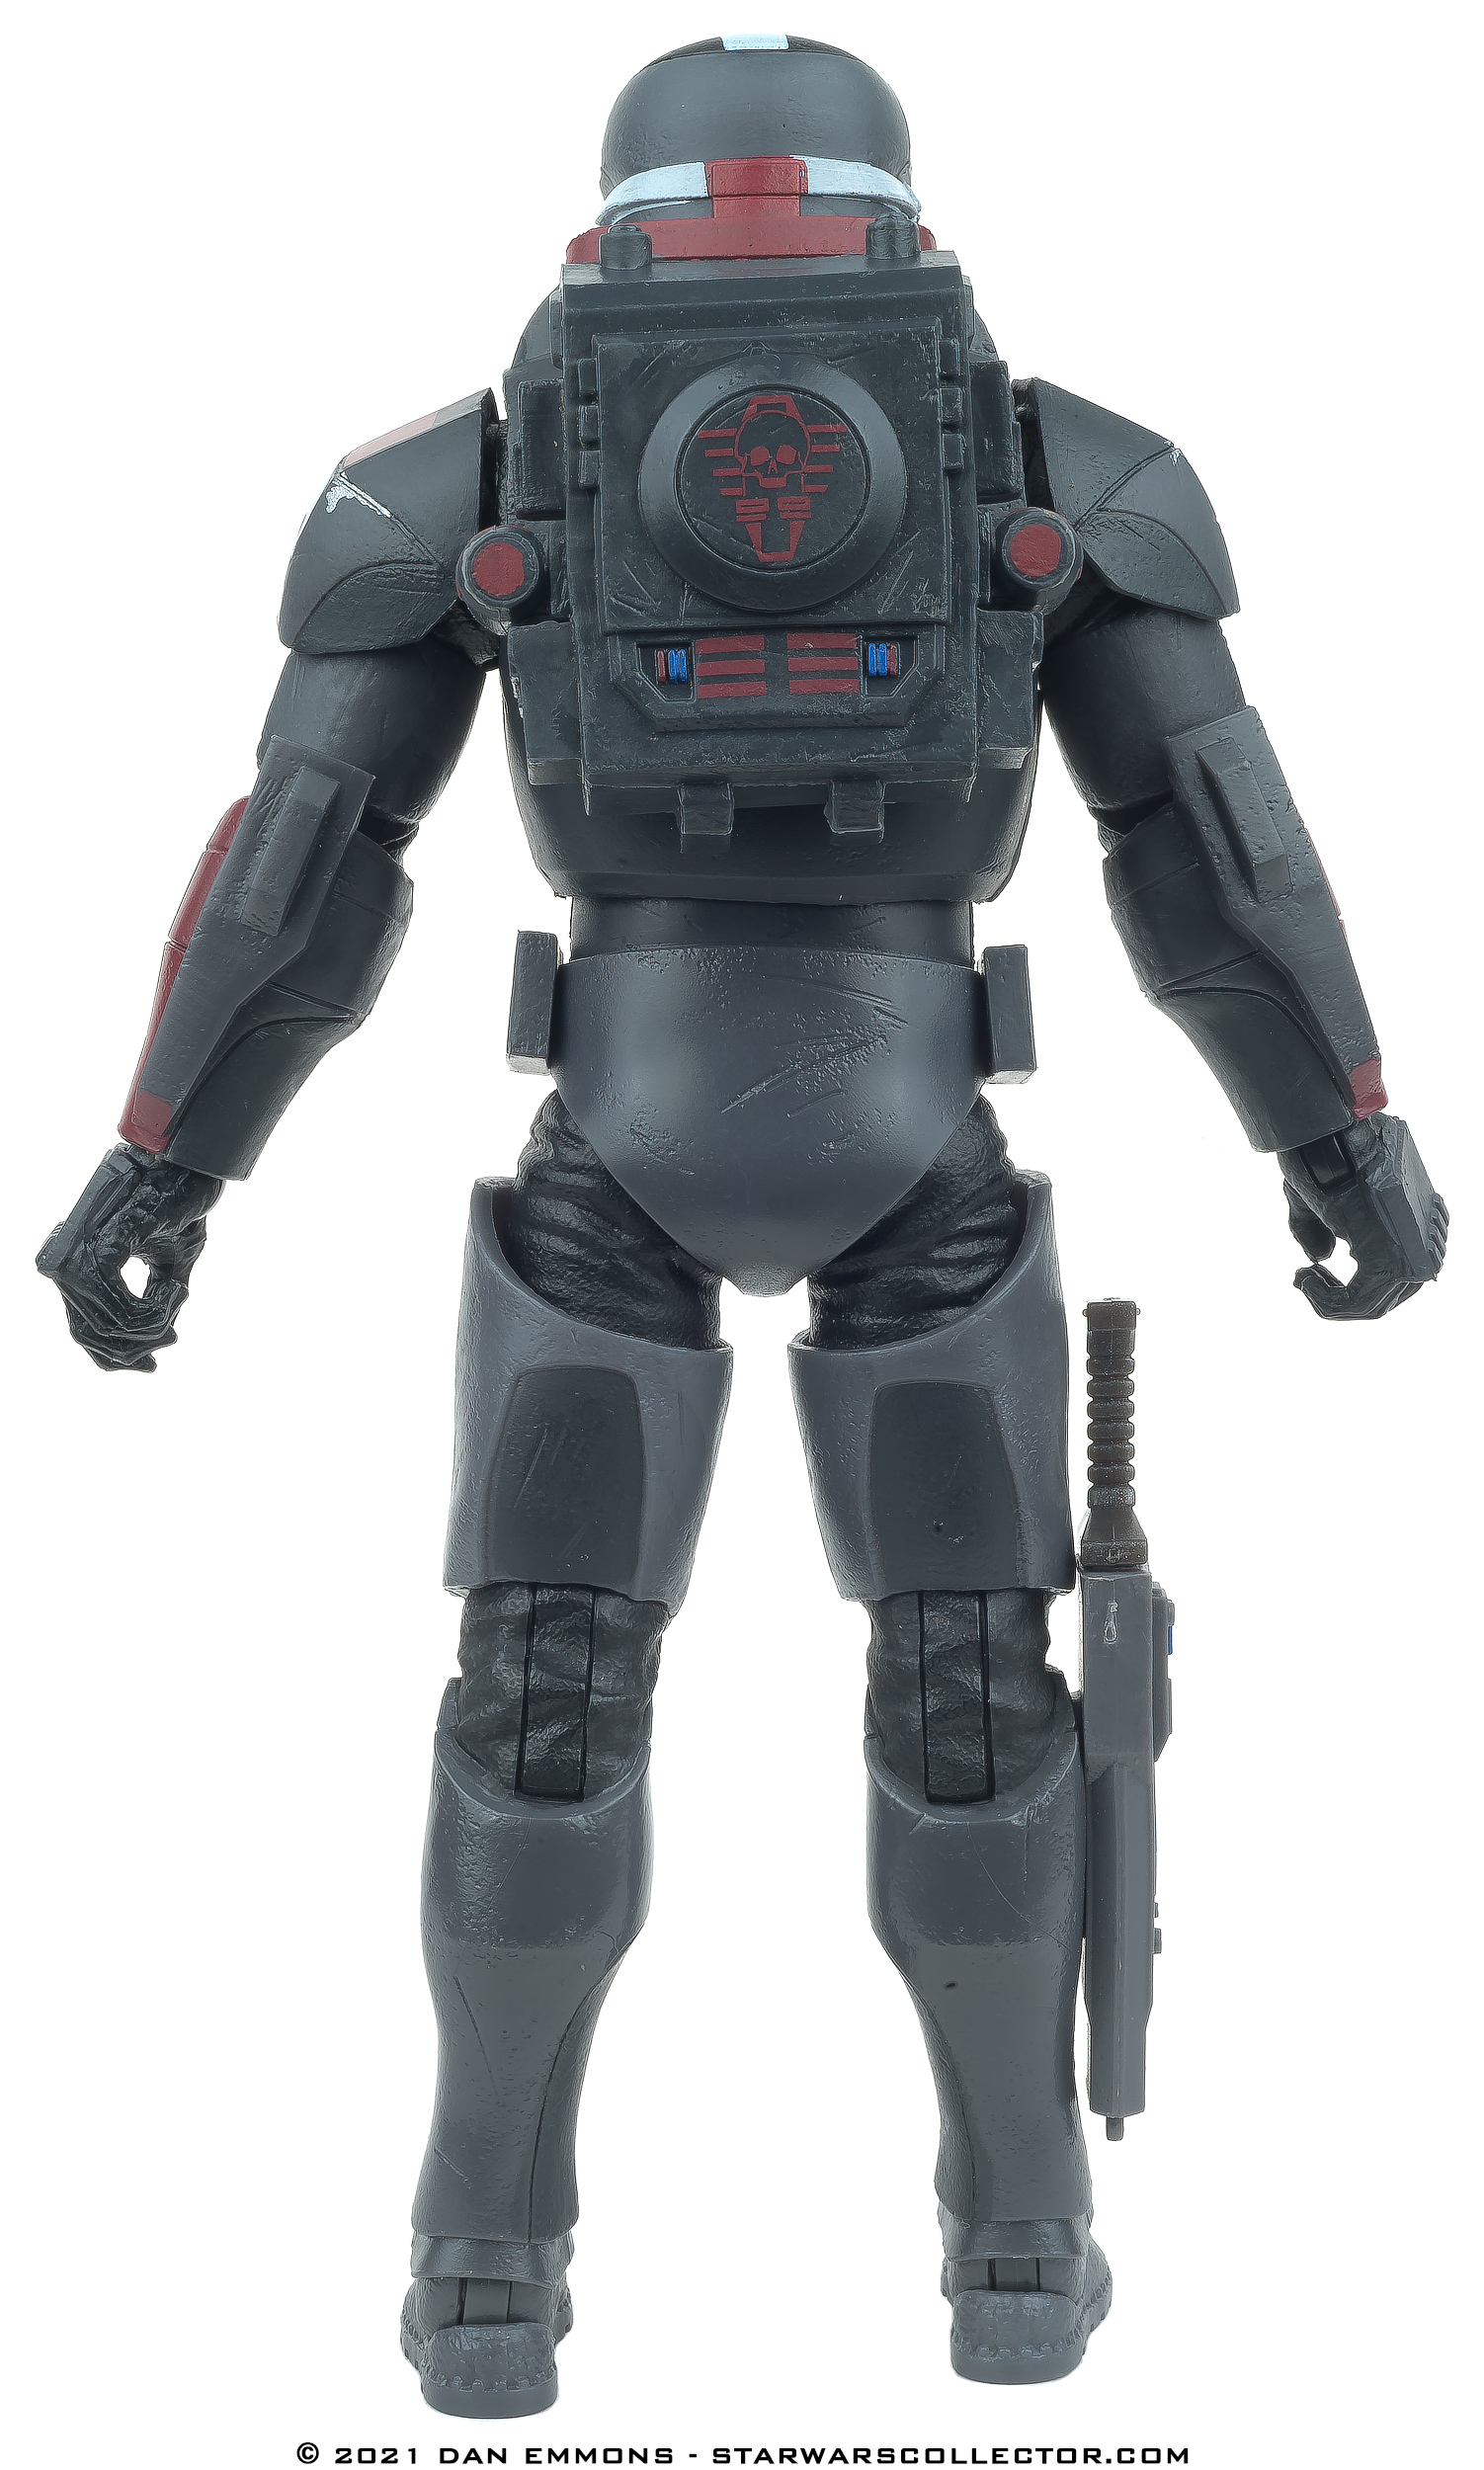 The Black Series 6-Inch Colorways Deluxe 05: Wrecker